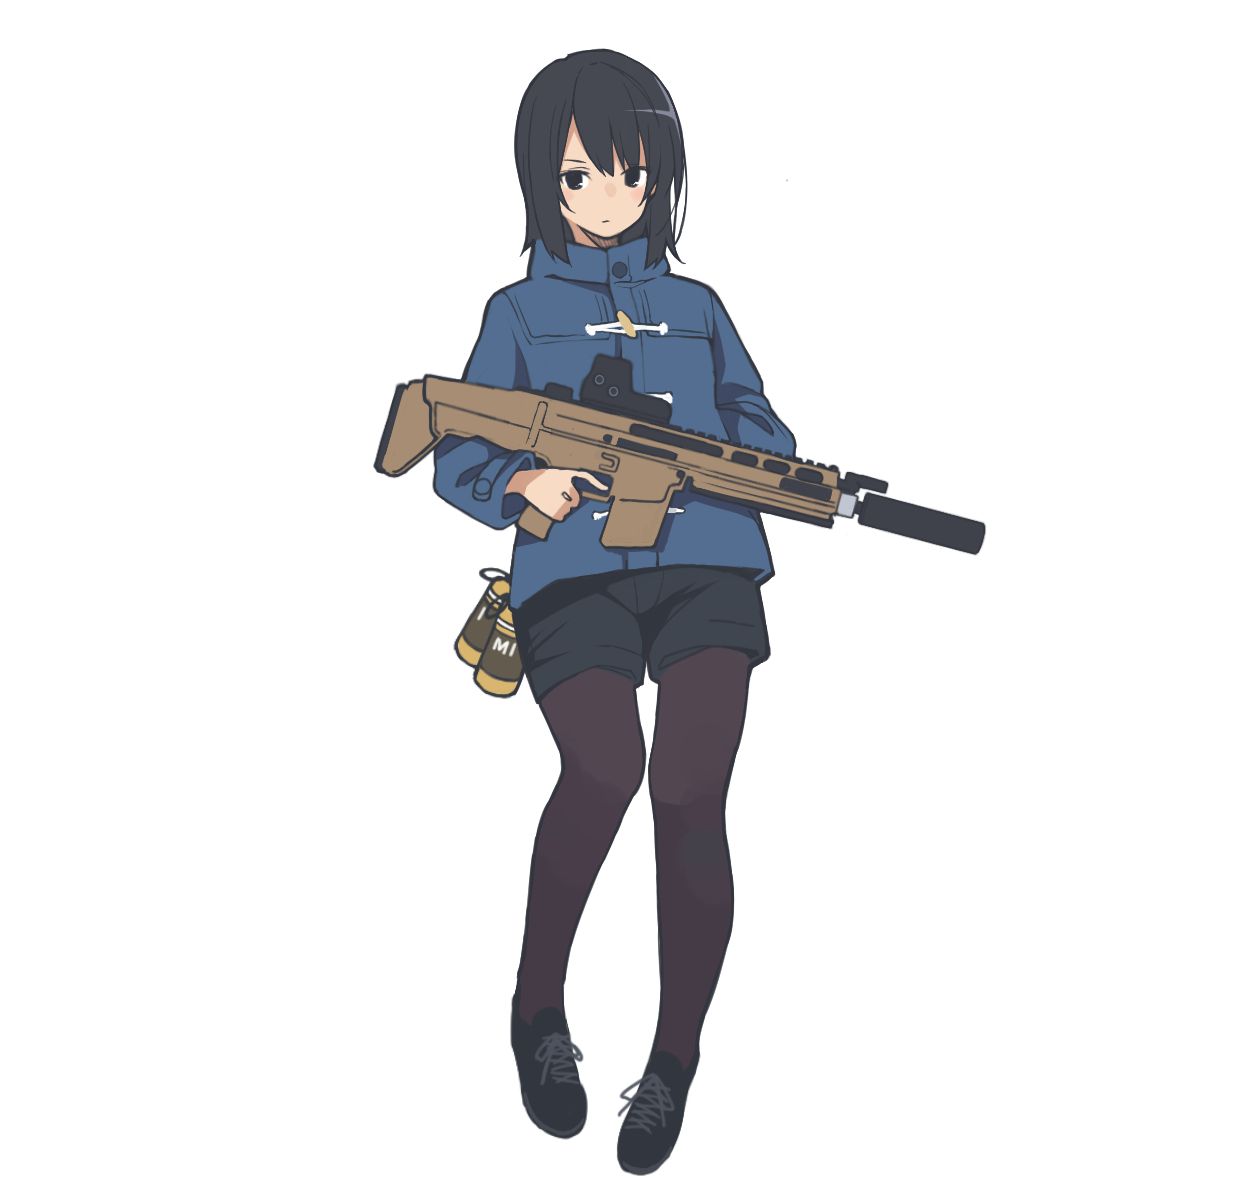 Secondary image of a pretty girl with a firearm, etc. 4 [non-erotic] 33